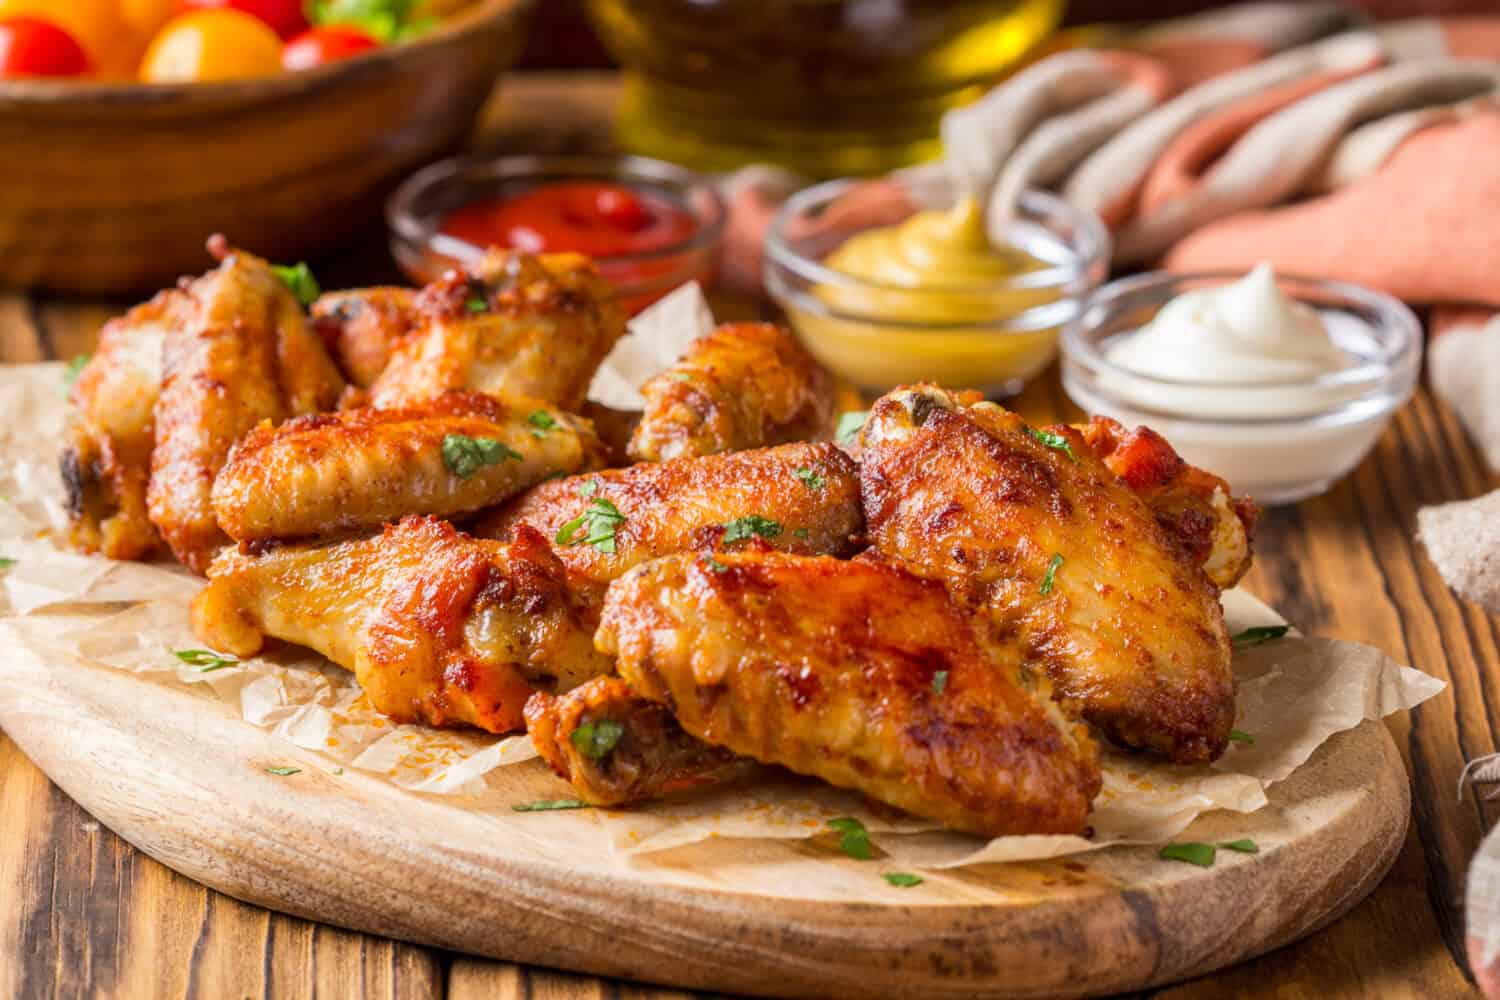 Grilled chicken wings with ketchup and mustard sauces on a wooden board. Traditional baked bbq buffalo